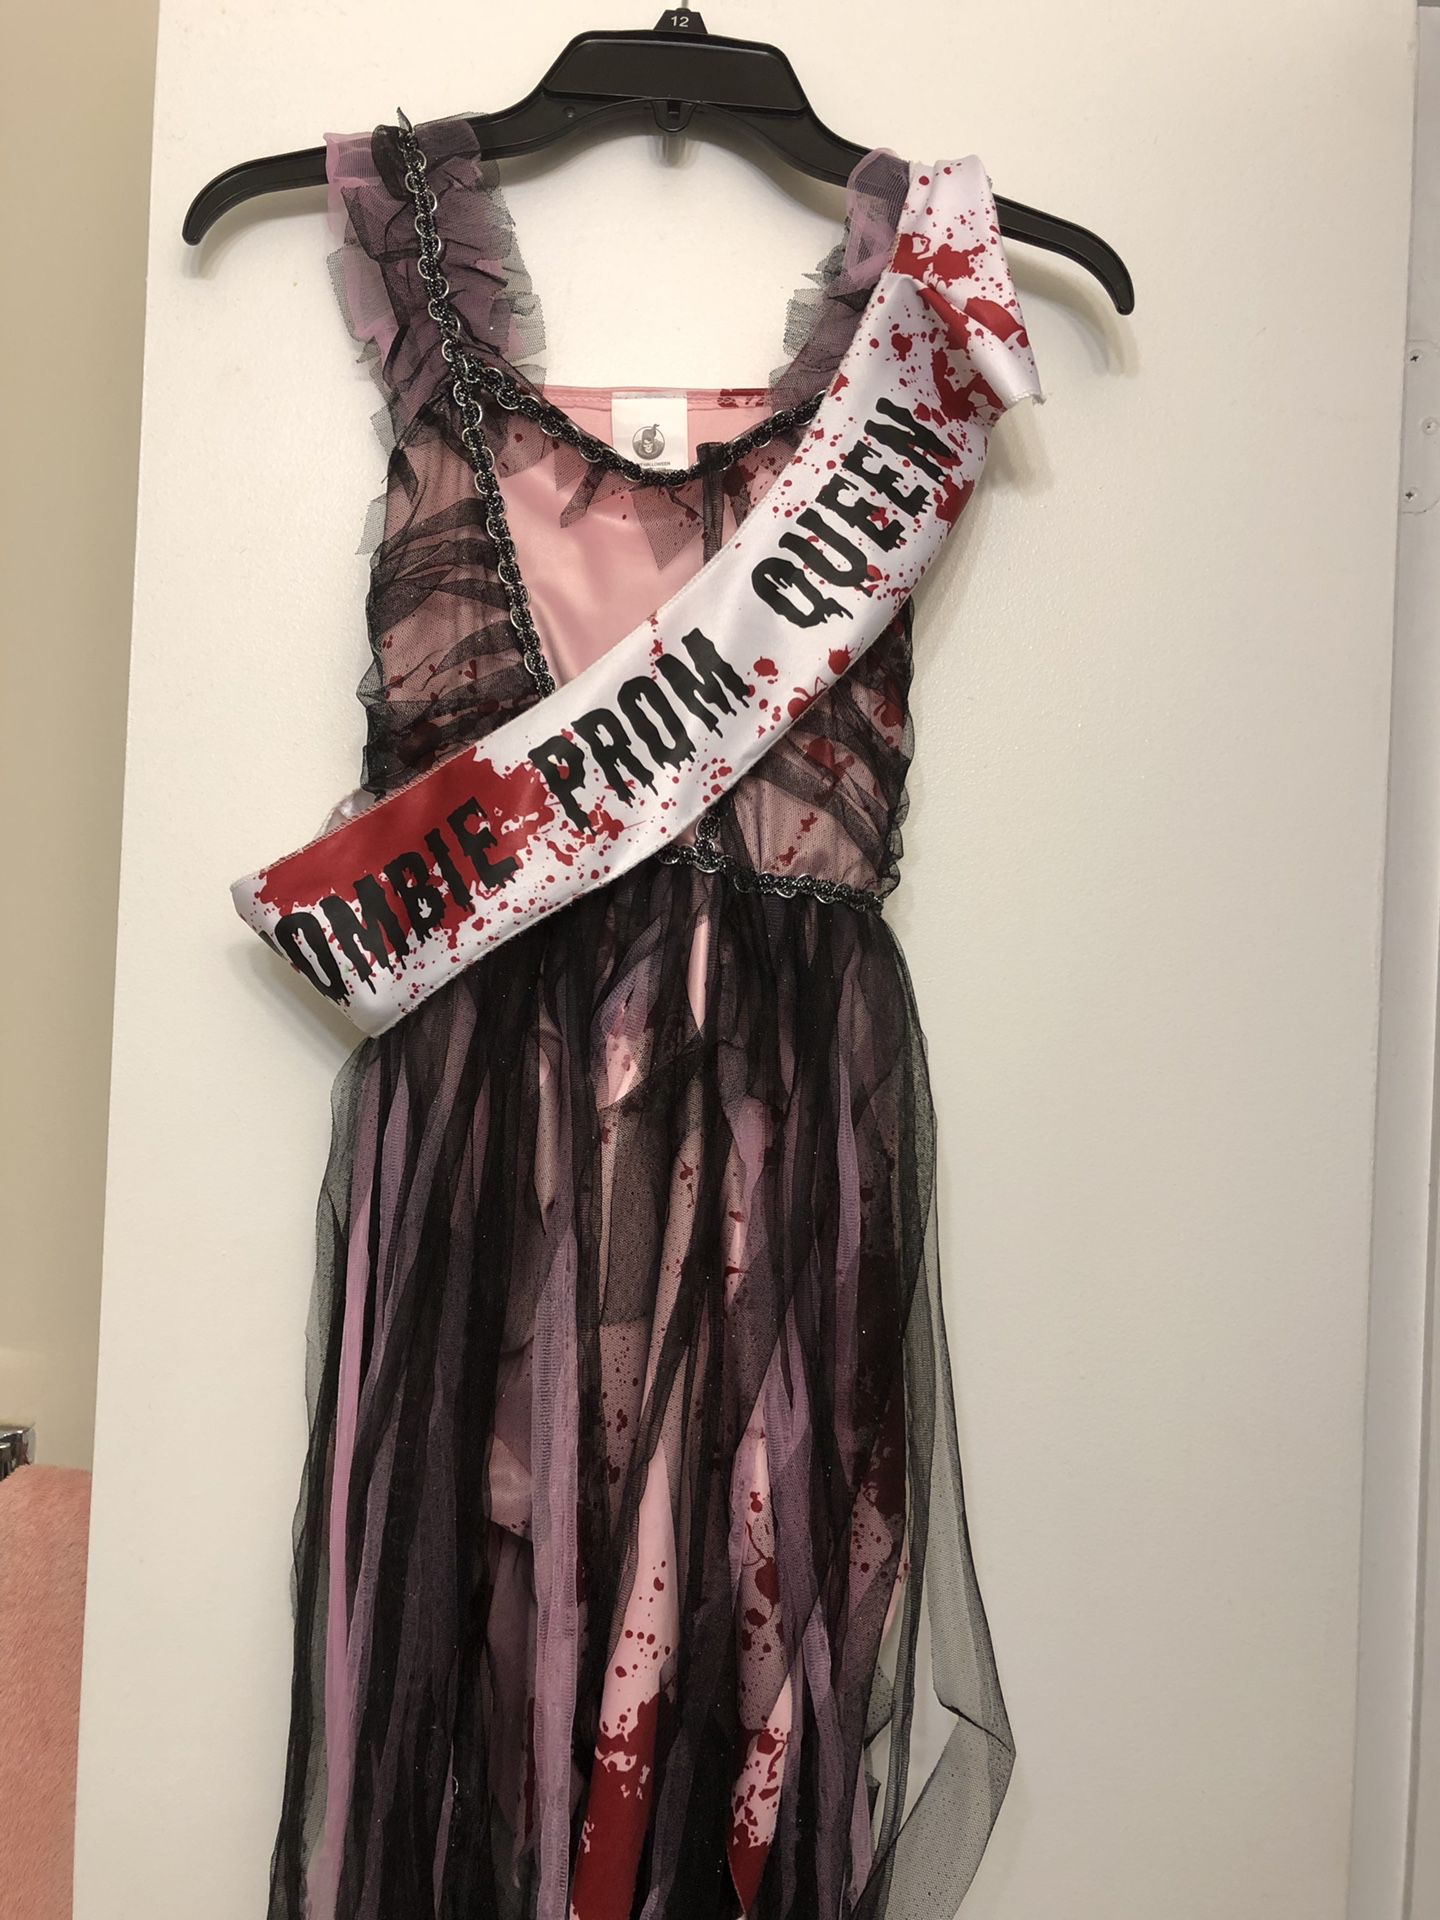 Zombie Prom Queen Costume with crown, corsage, and lace gloves, size Medium